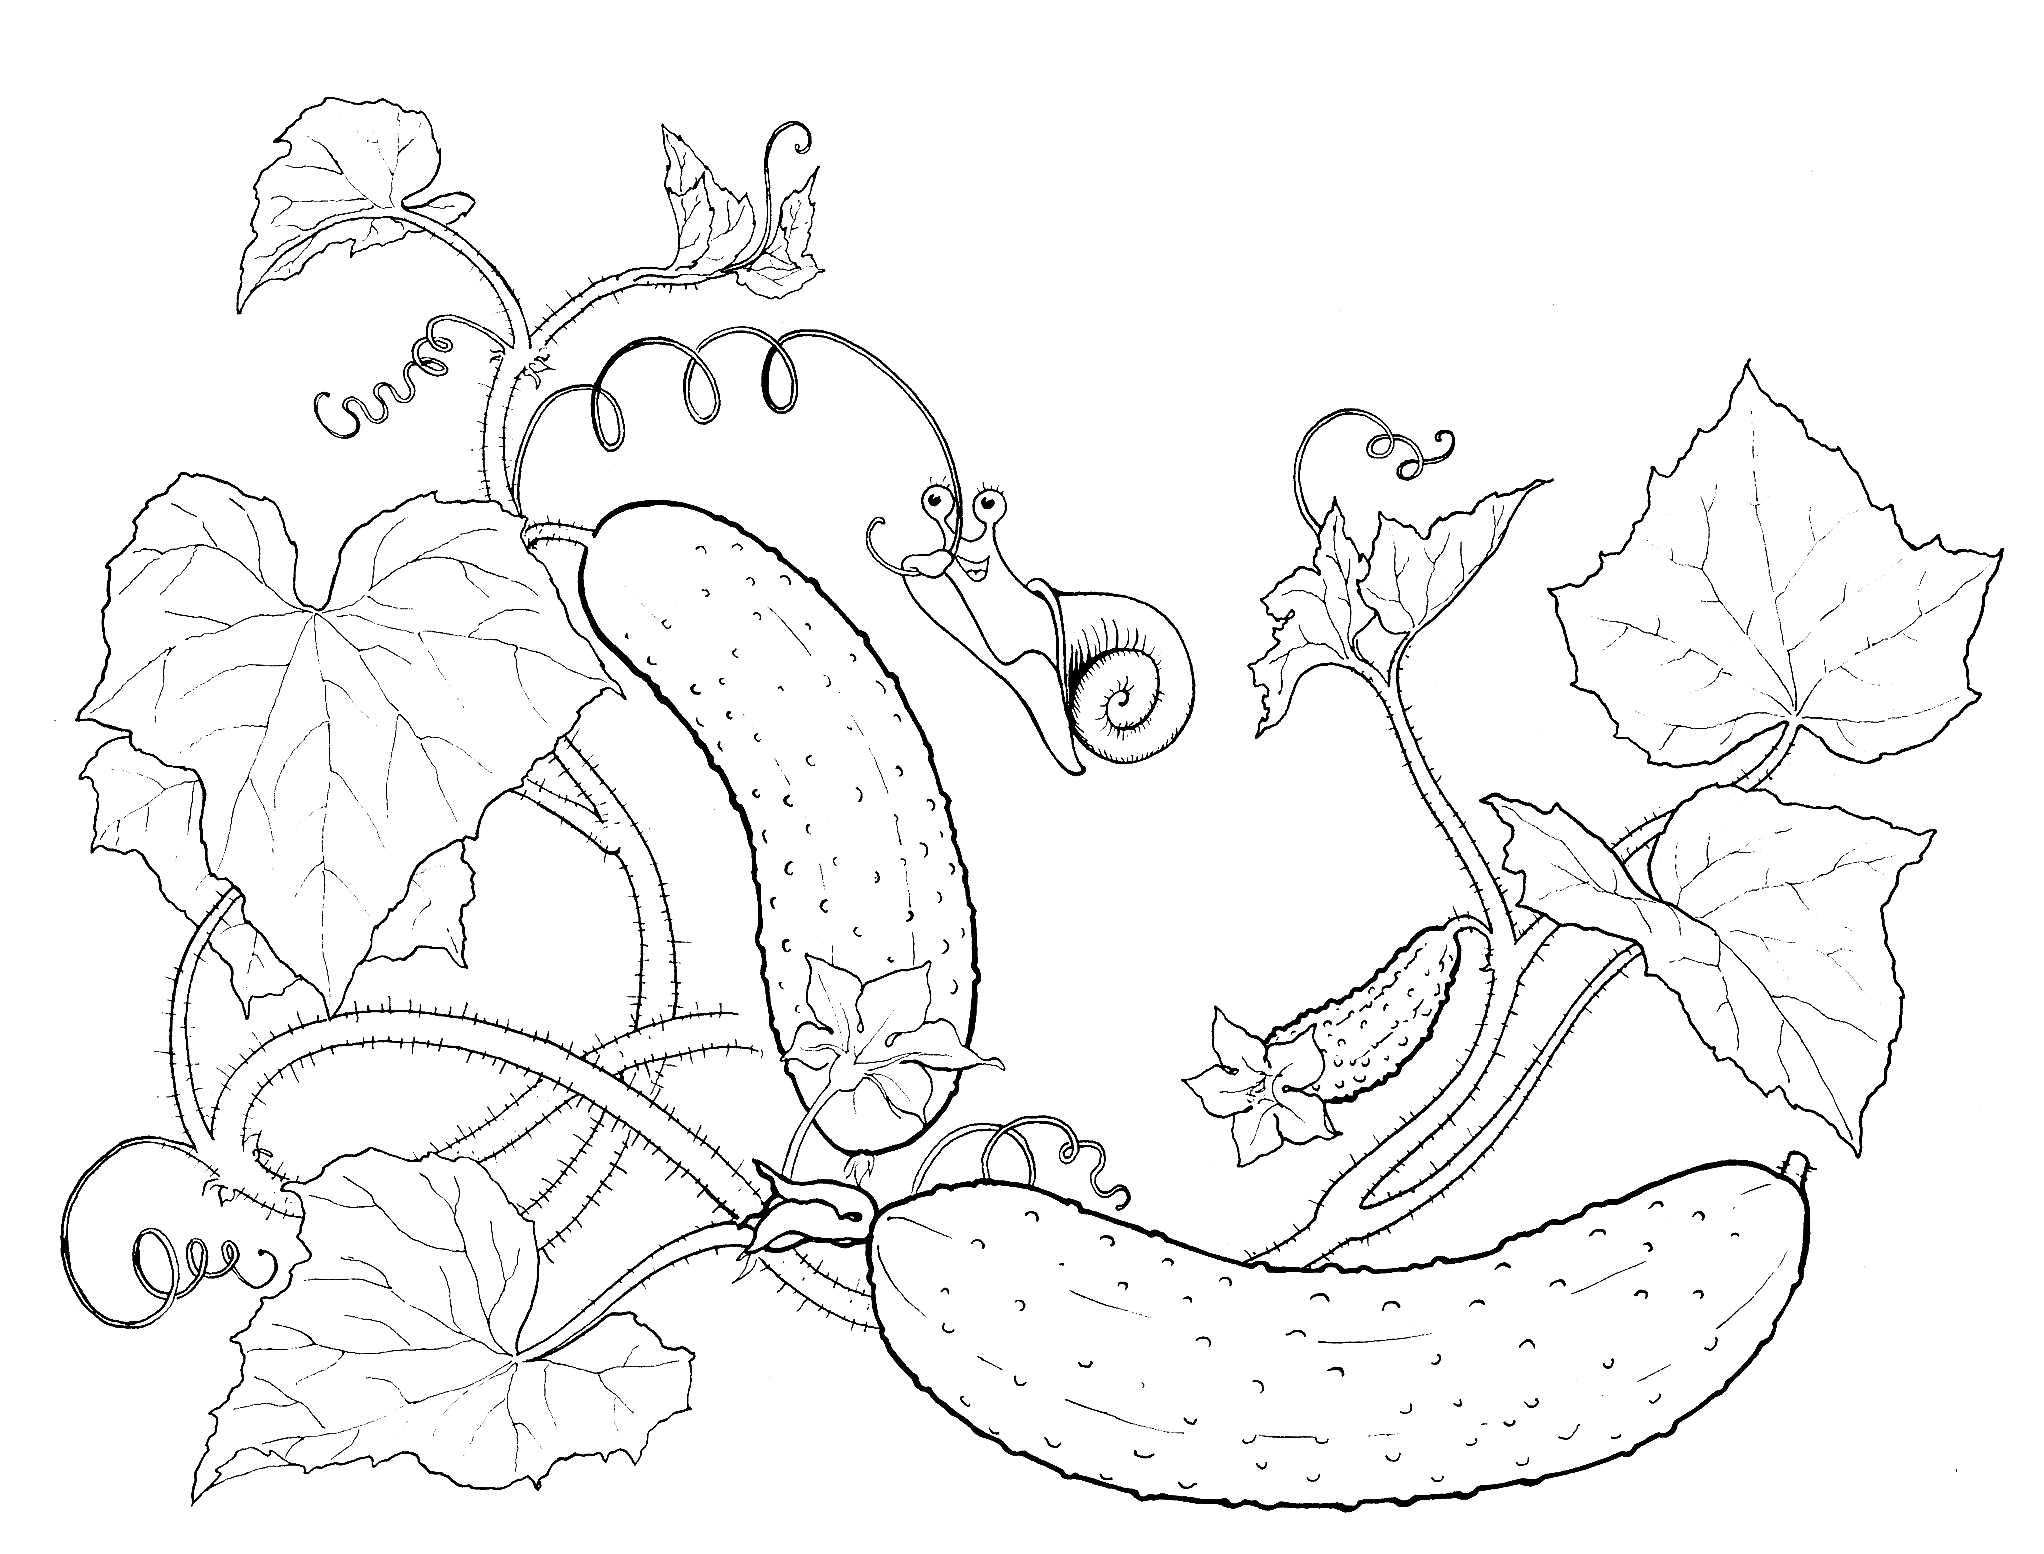 Coloring page - Cucumbers